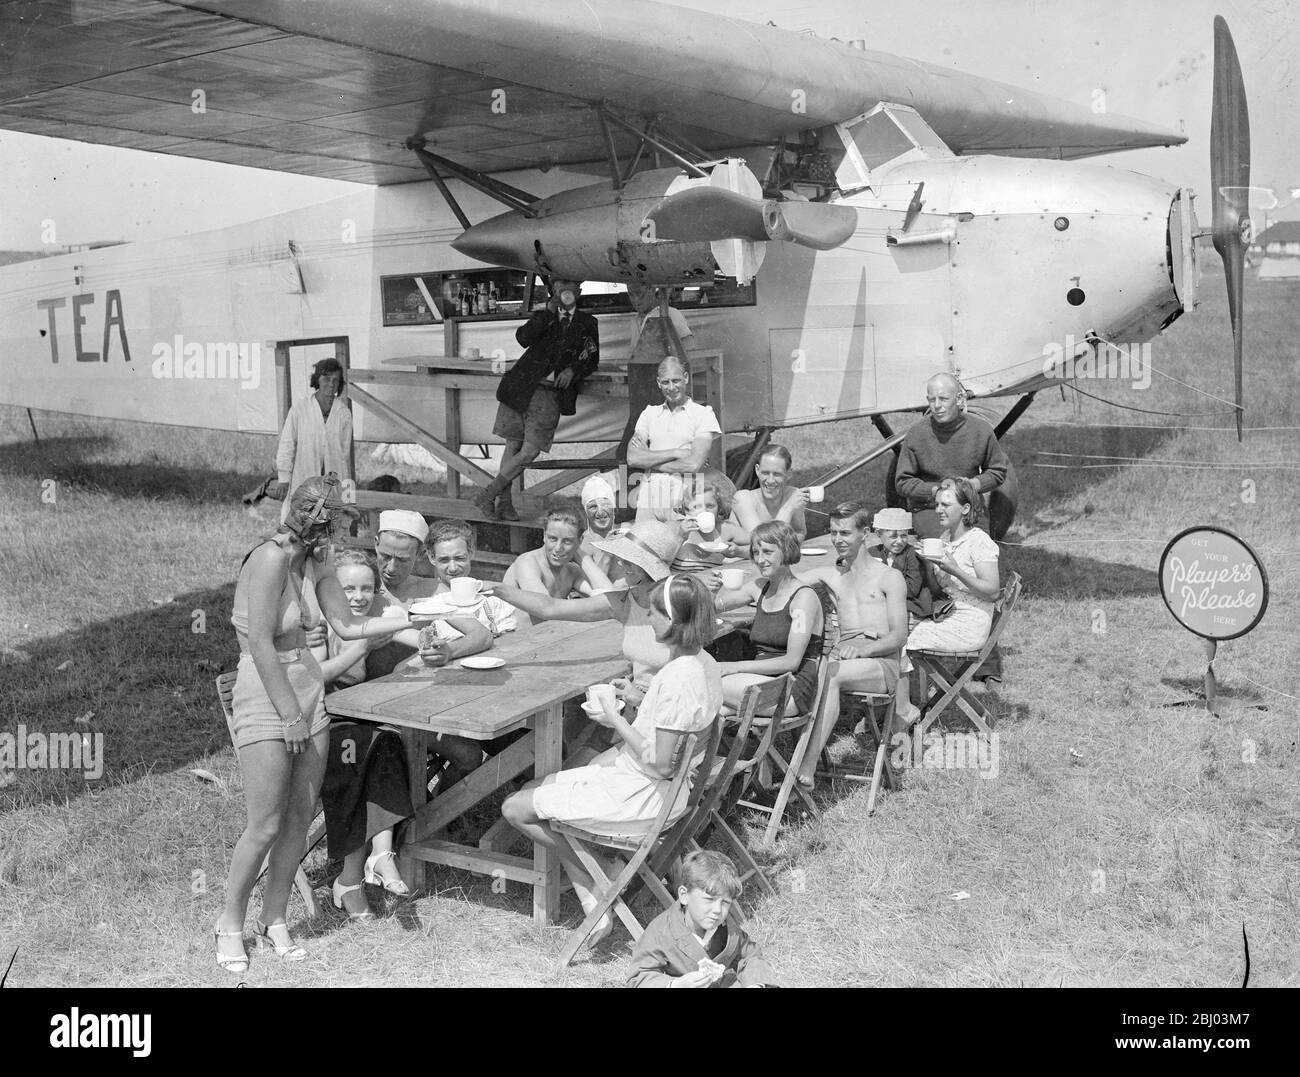 Air liner as seaside cafe . - A six seater air liner has found a novel end at Canvey Island , Essex , where it is being used as a cafe on the sea front camping ground . - The interior of the machine is used as the kitchean and servery and holiday makers have their lunches or teams in the shadow of the wings . - 28 July 1935 Stock Photo